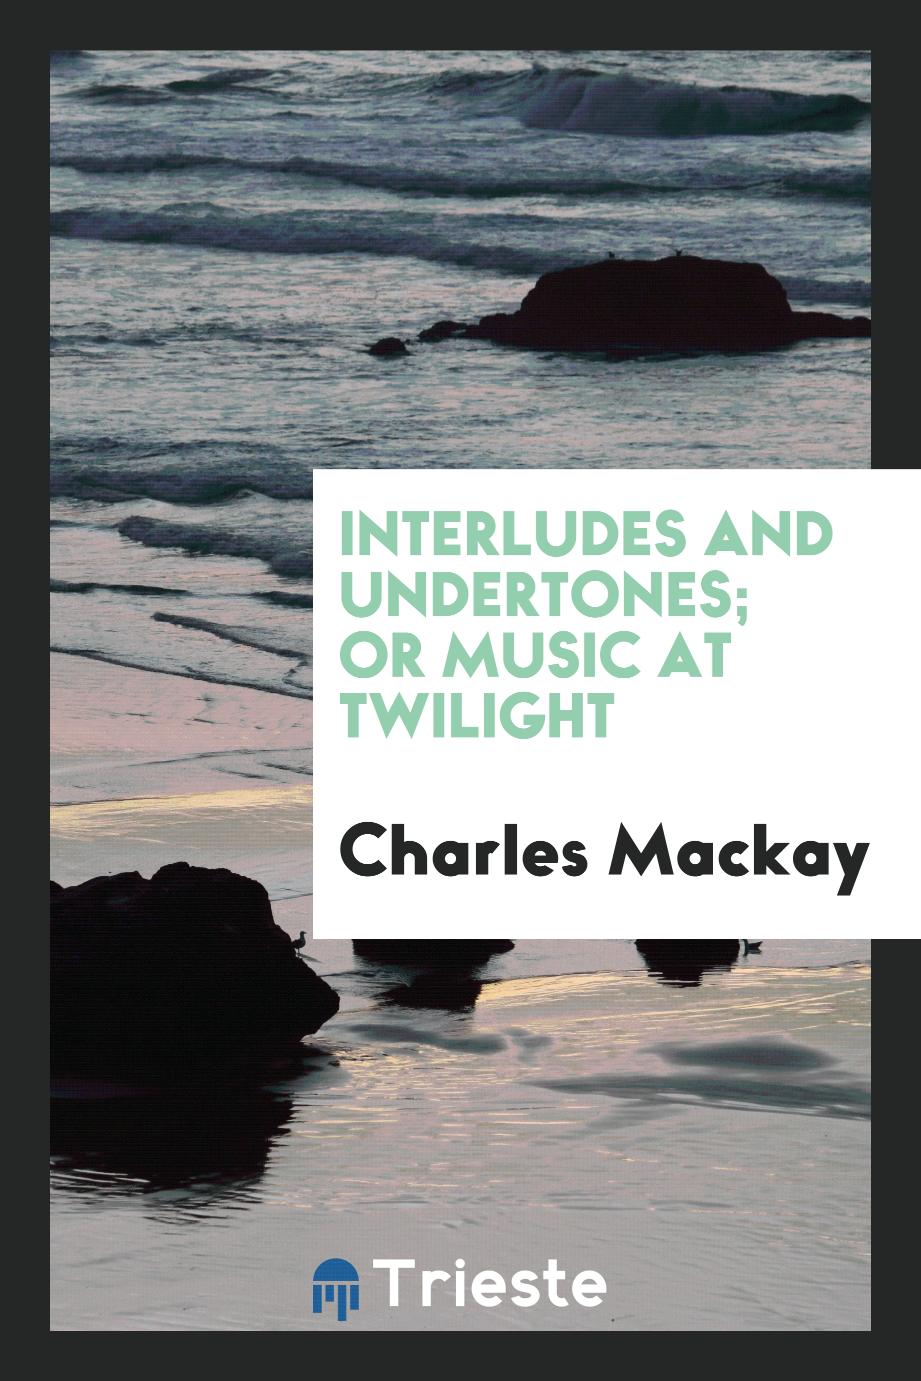 Interludes and undertones; or Music at twilight